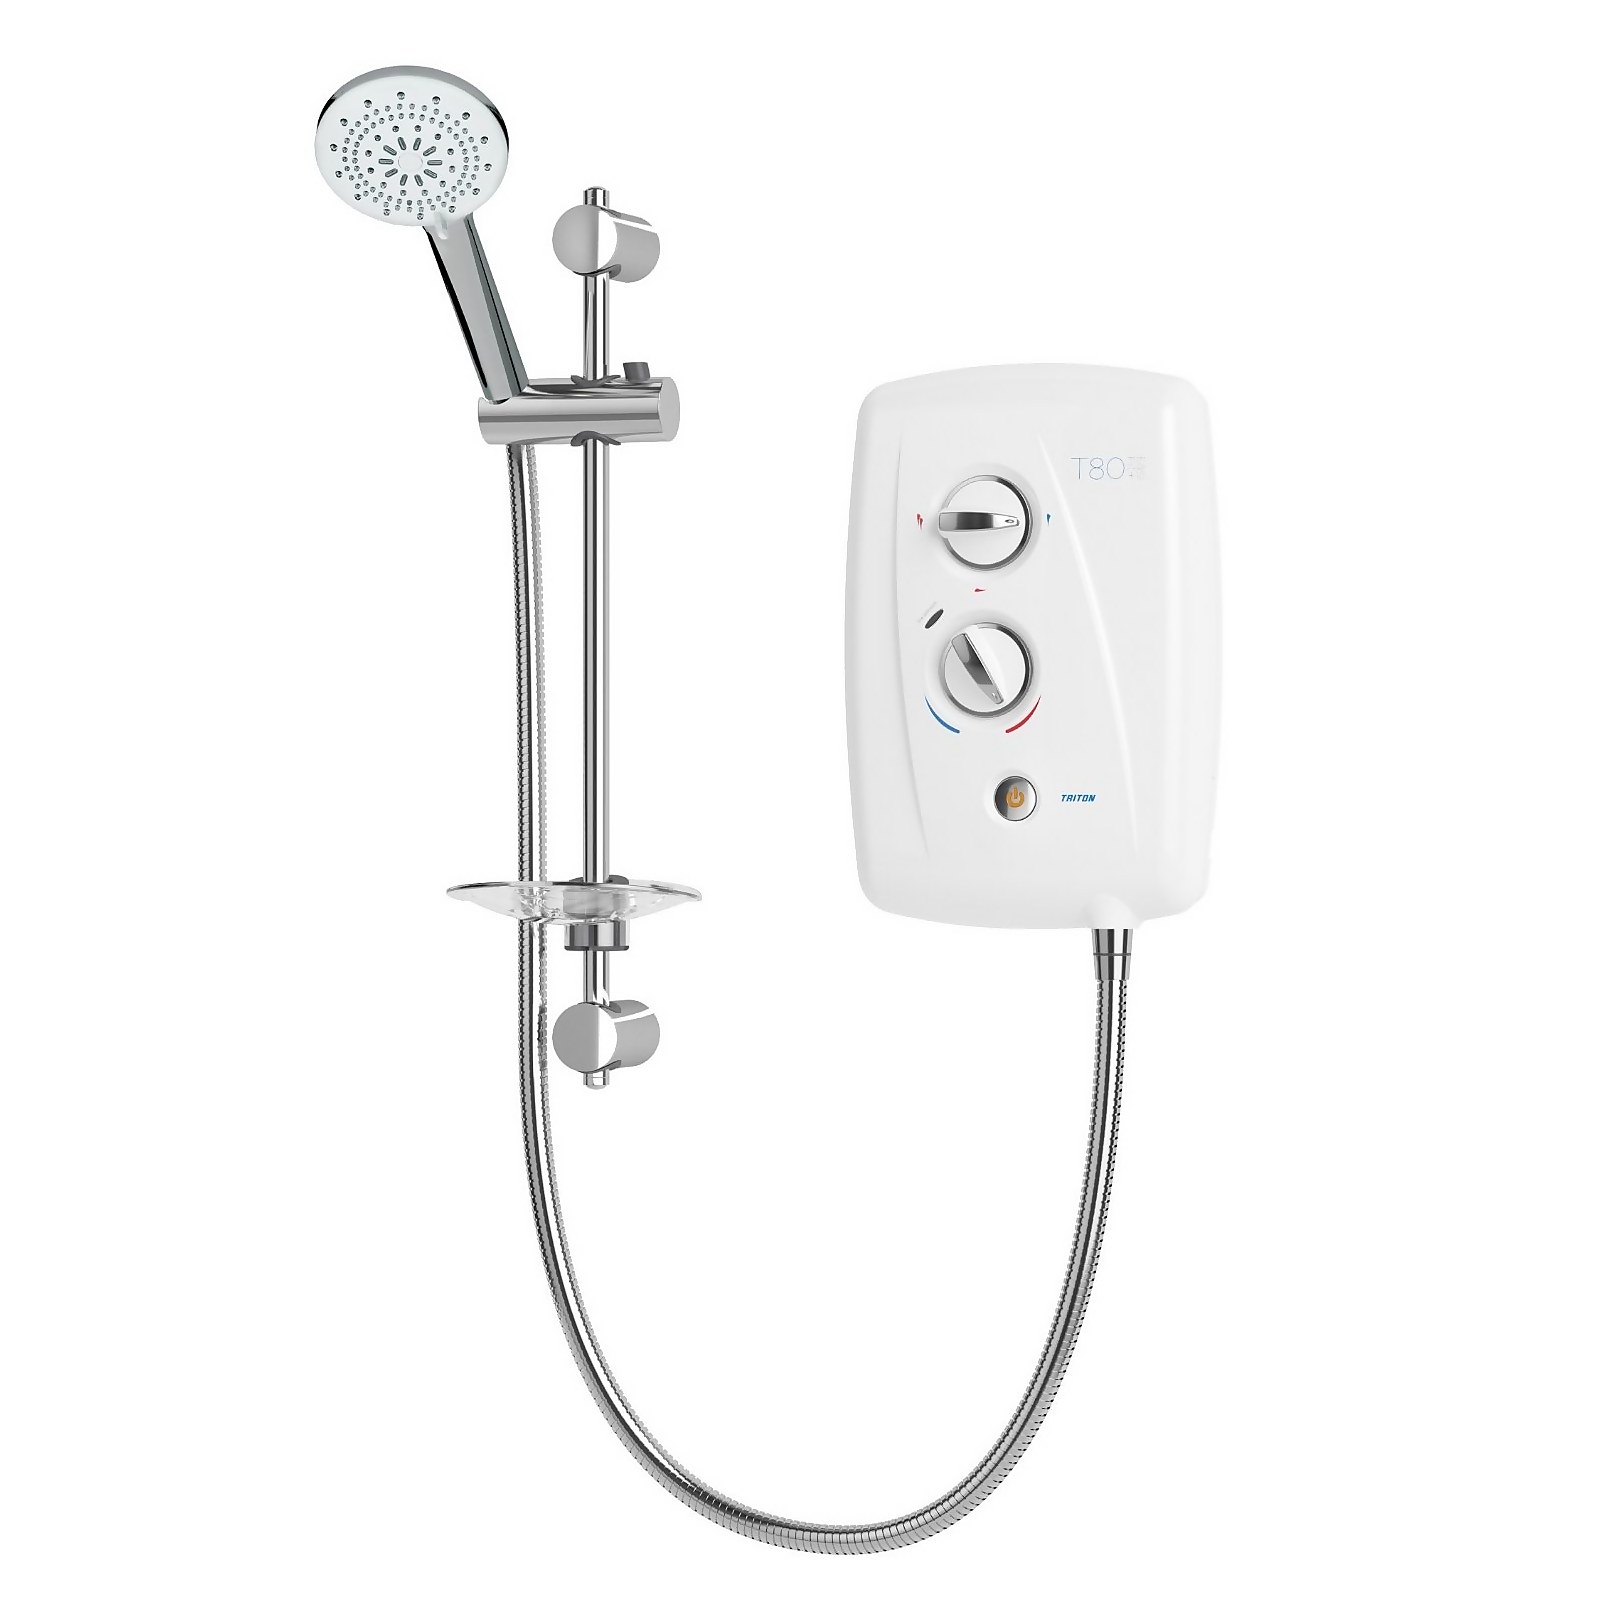 Photo of T80 Easi-fit+ 8.5kw Electric Shower - White